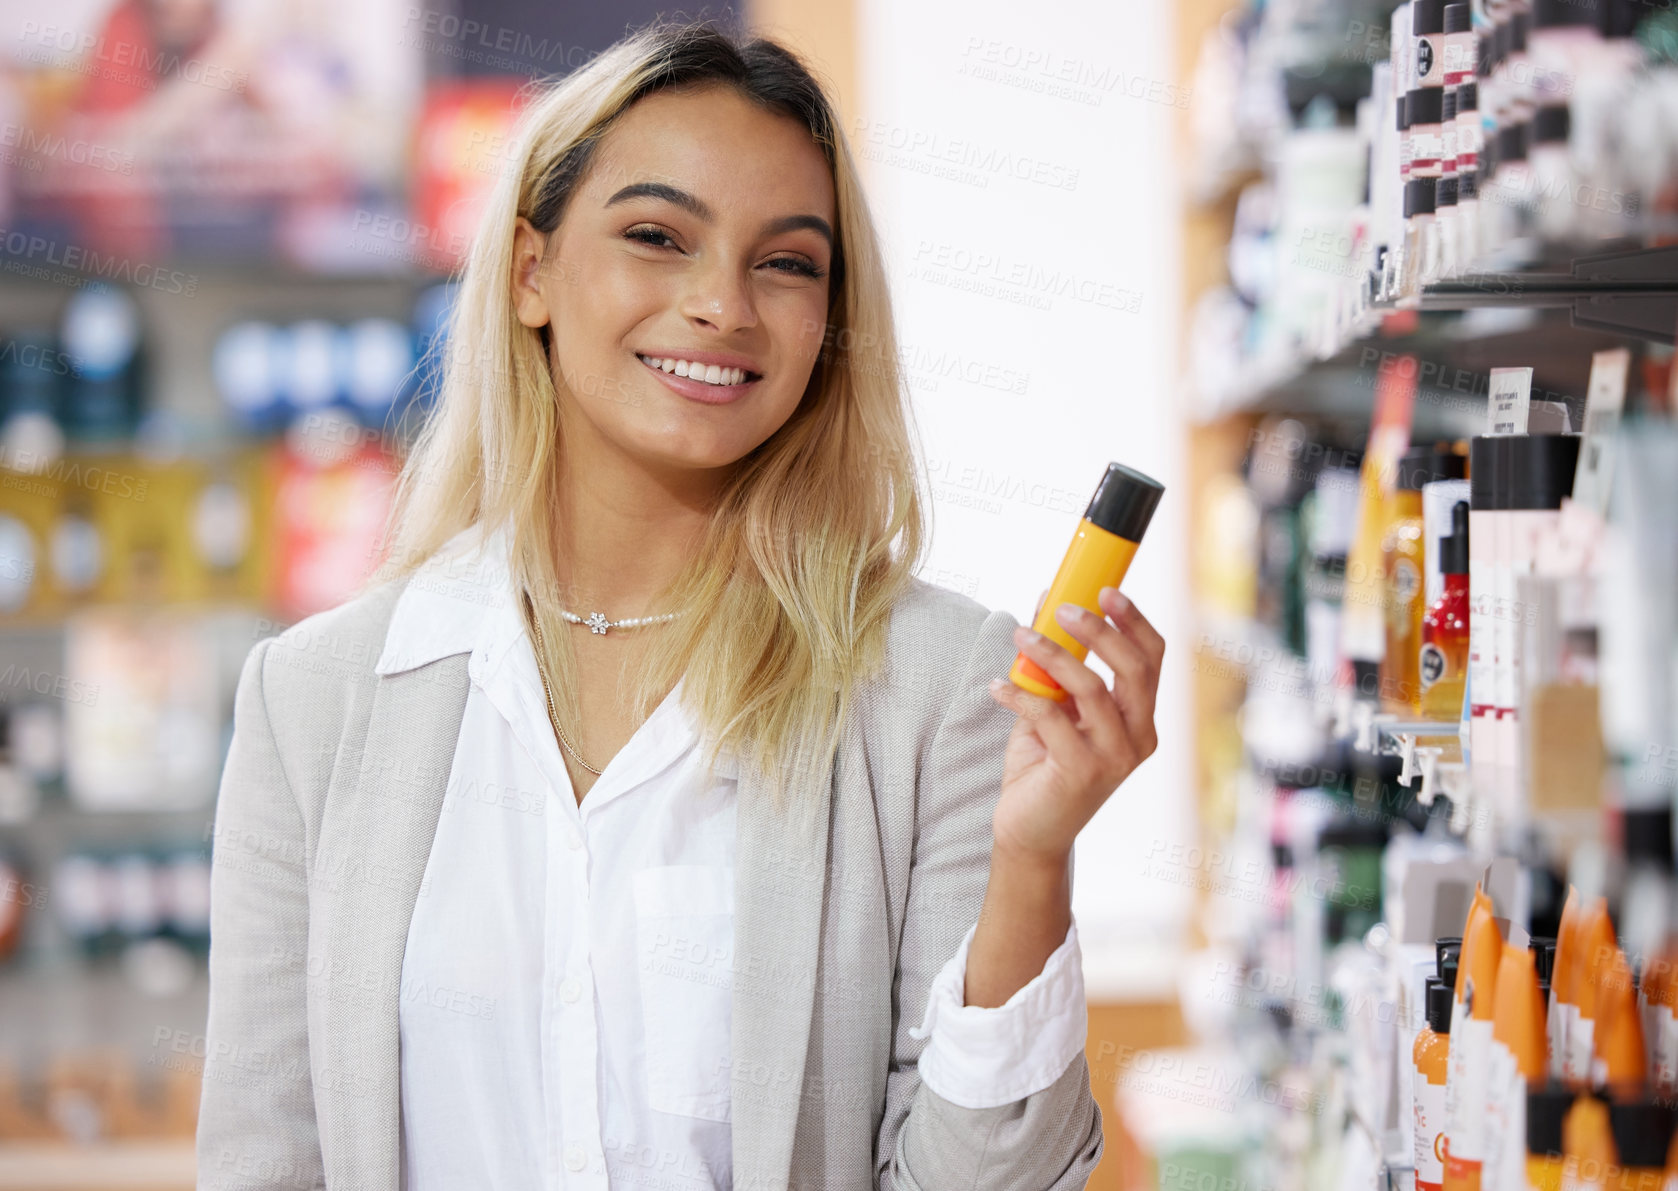 Buy stock photo Cropped portrait of an attractive young woman shopping in a cosmetics store